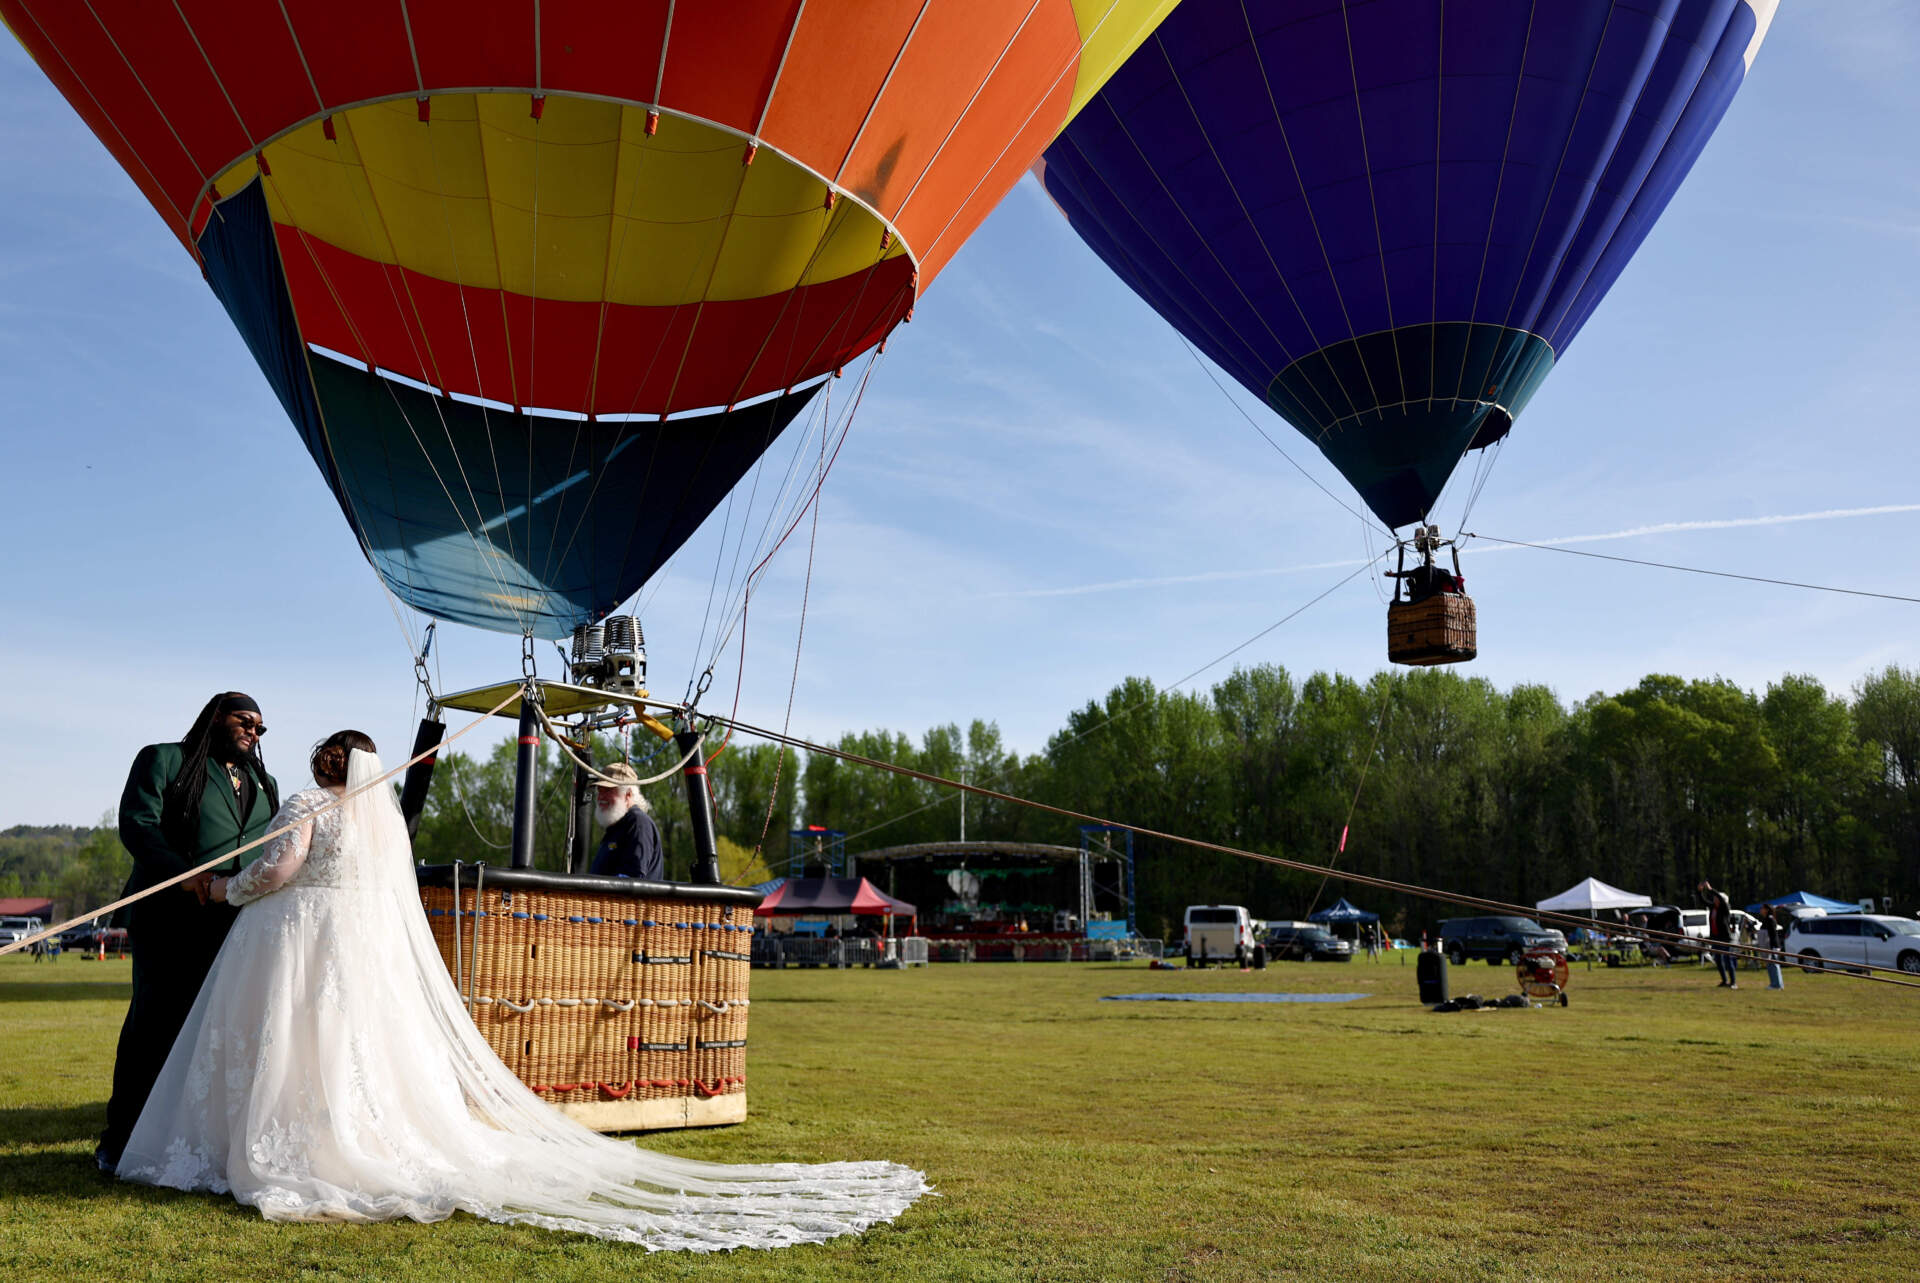 Bride and groom Kylee and Michael Rice prepare to take a hot air balloon ride before a planned mass wedding of over 200 couples at the Total Eclipse of the Heart festival on April 8, 2024 in Russellville, Arkansas. (Mario Tama/Getty Images)